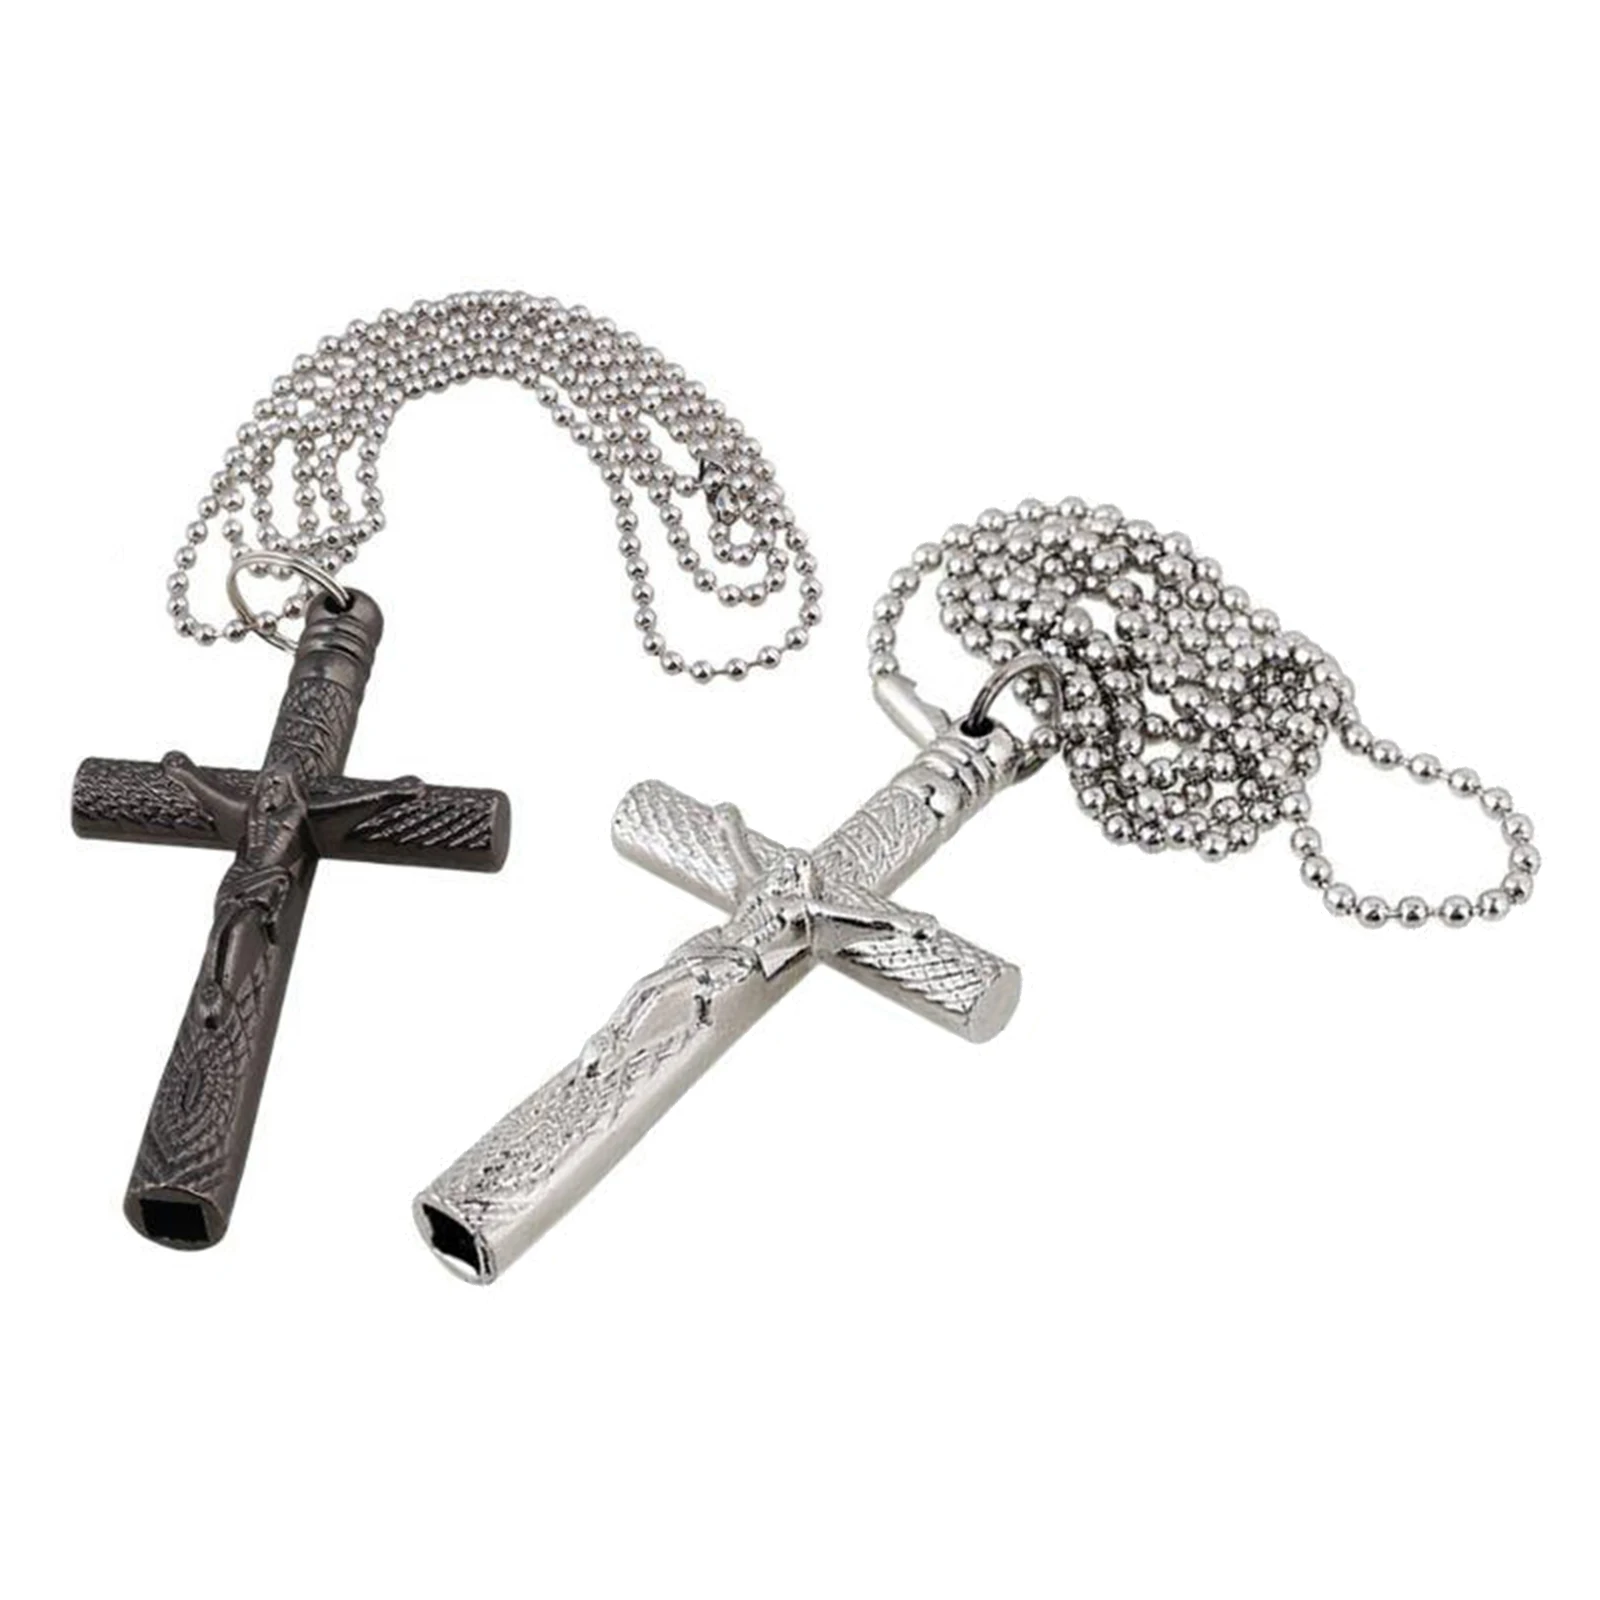 Steel Jesus Cross Drum Tuning Key Pendant Wrench Instruments Parts Accessory